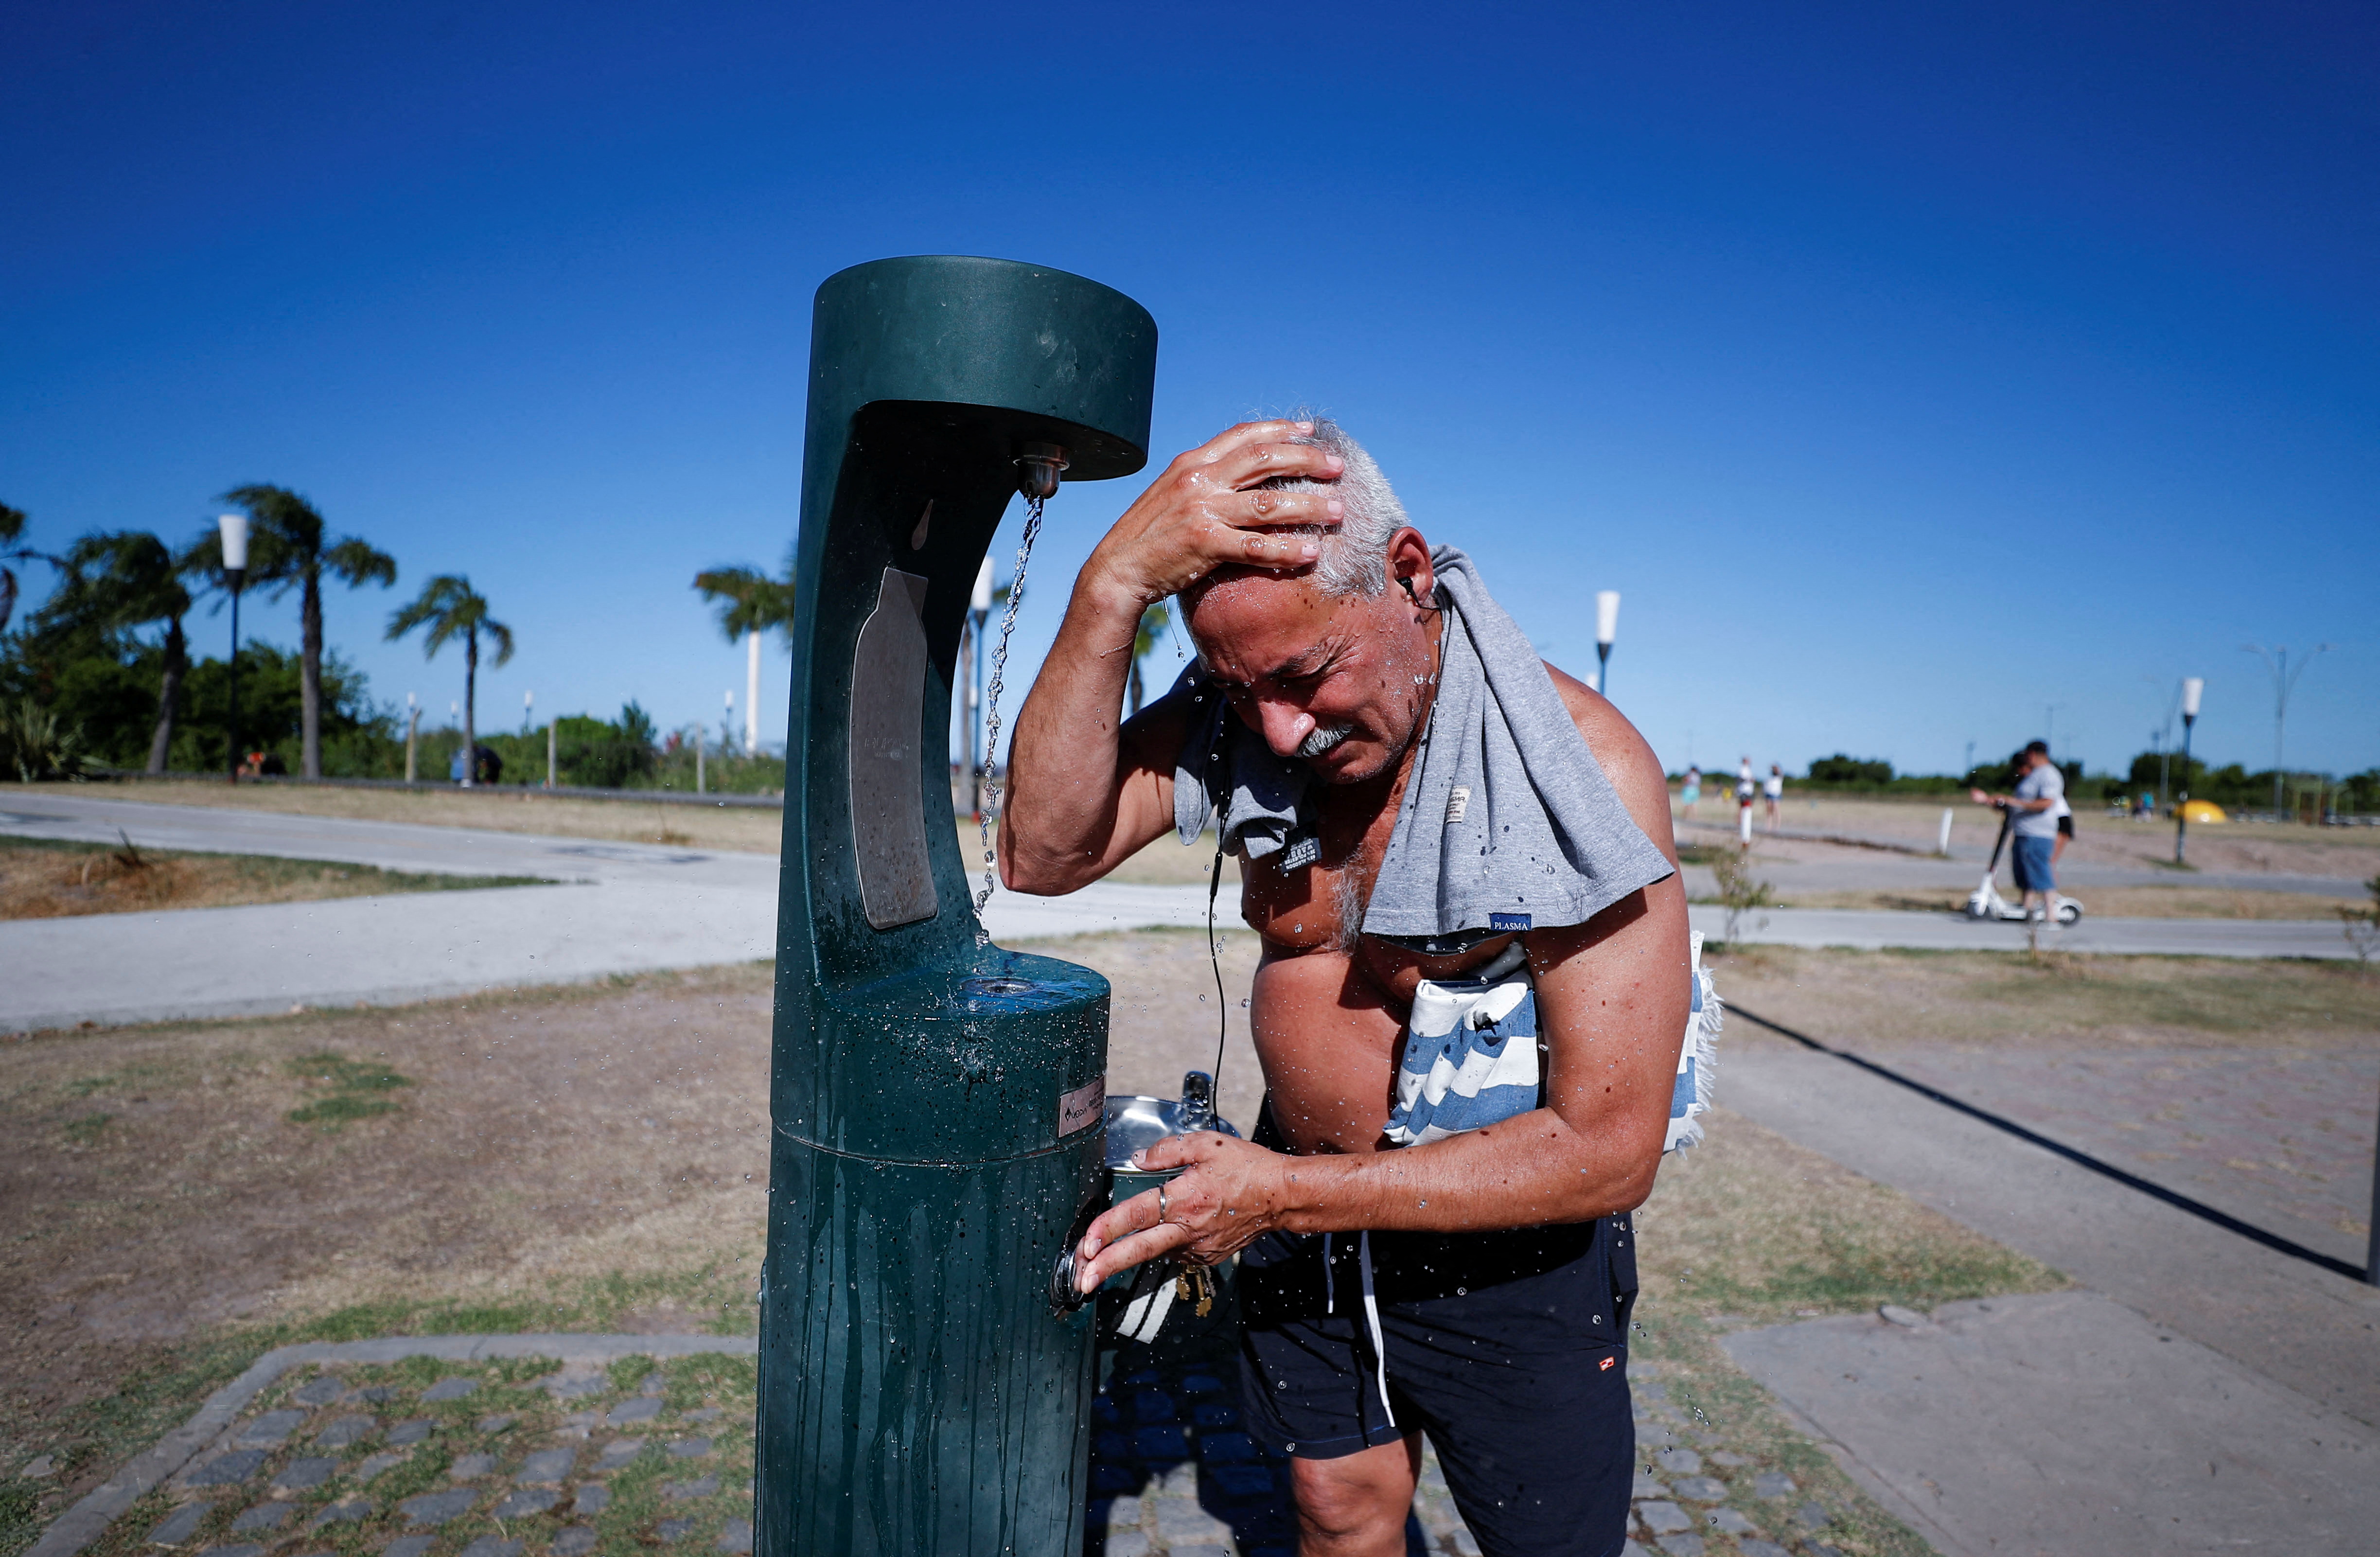 A man refreshes as he enjoys the day by the shore of the Rio de la Plata river during a heat wave amid a spike of the coronavirus disease (COVID-19) cases, in Buenos Aires, Argentina January 9, 2022. REUTERS/Agustin Marcarian